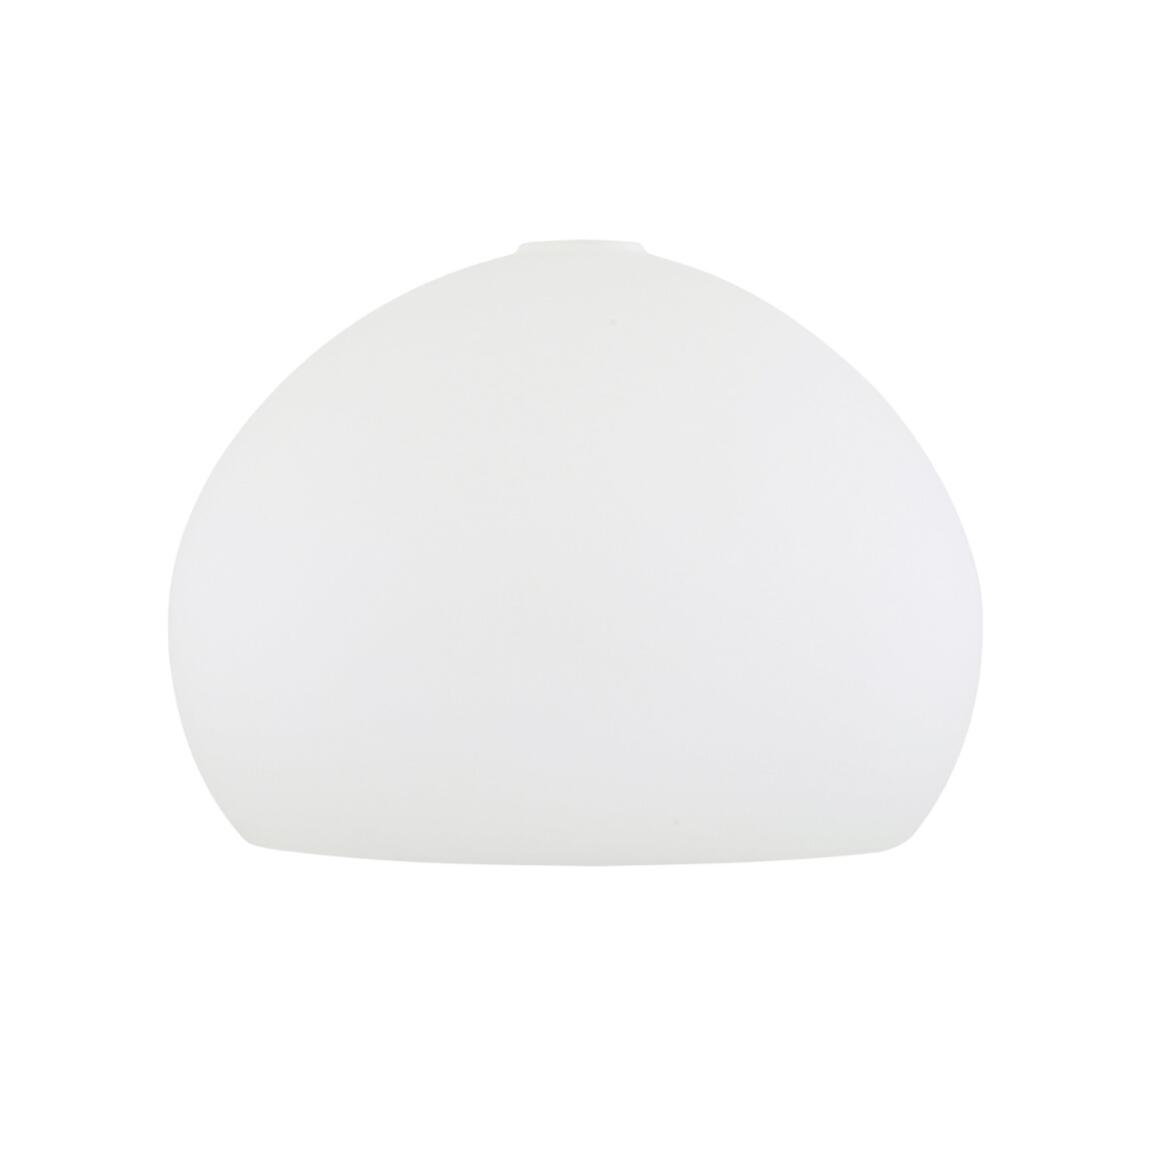 Sphere glass lamp shade main product image